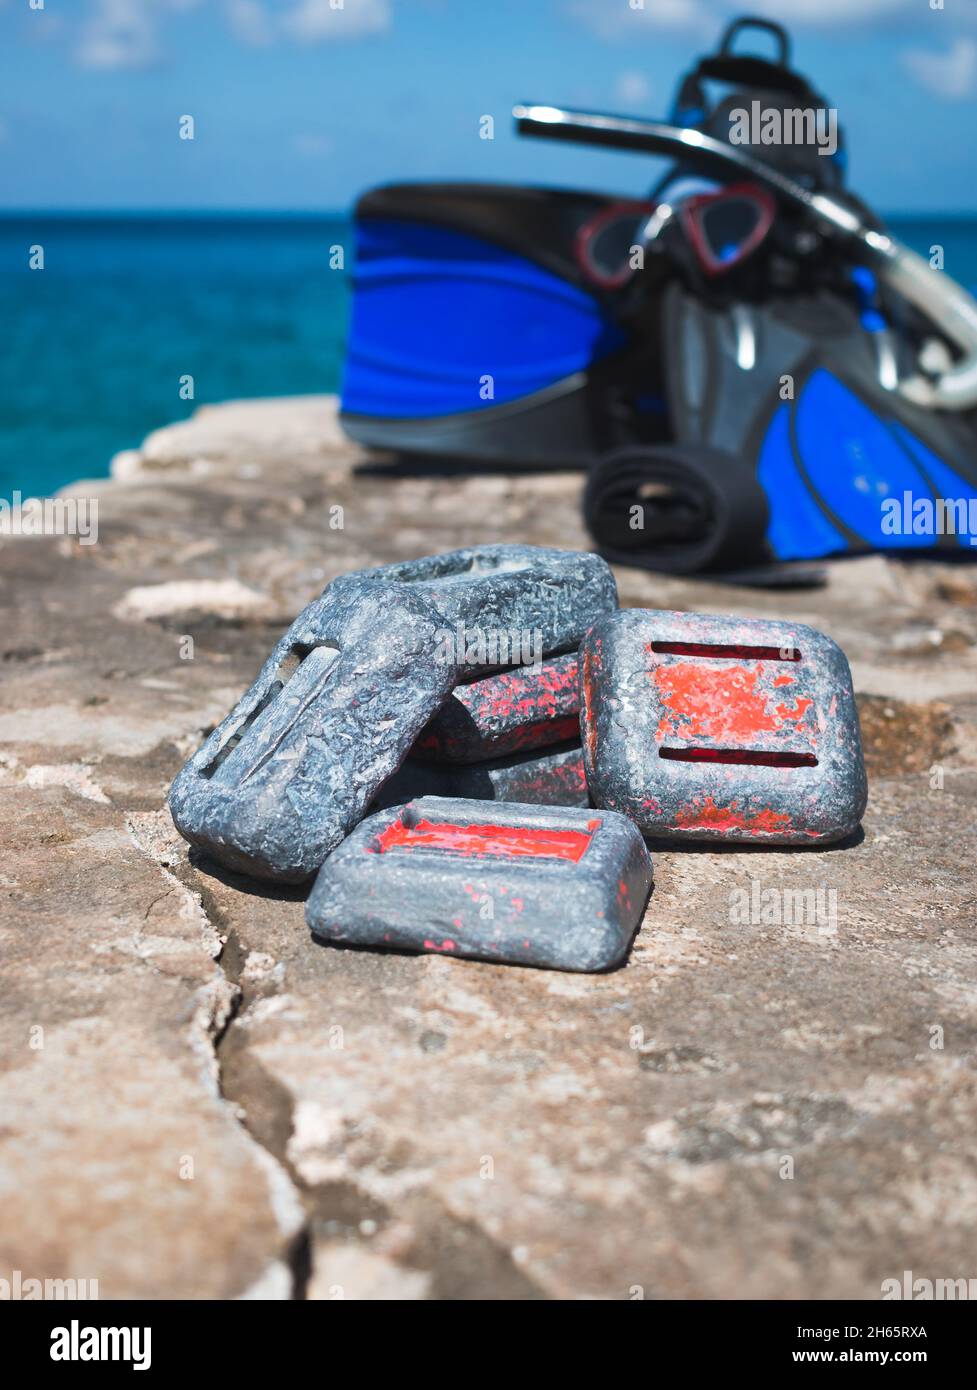 Scuba diving weights on rock by the ocean with snorkeling equipment in background Stock Photo